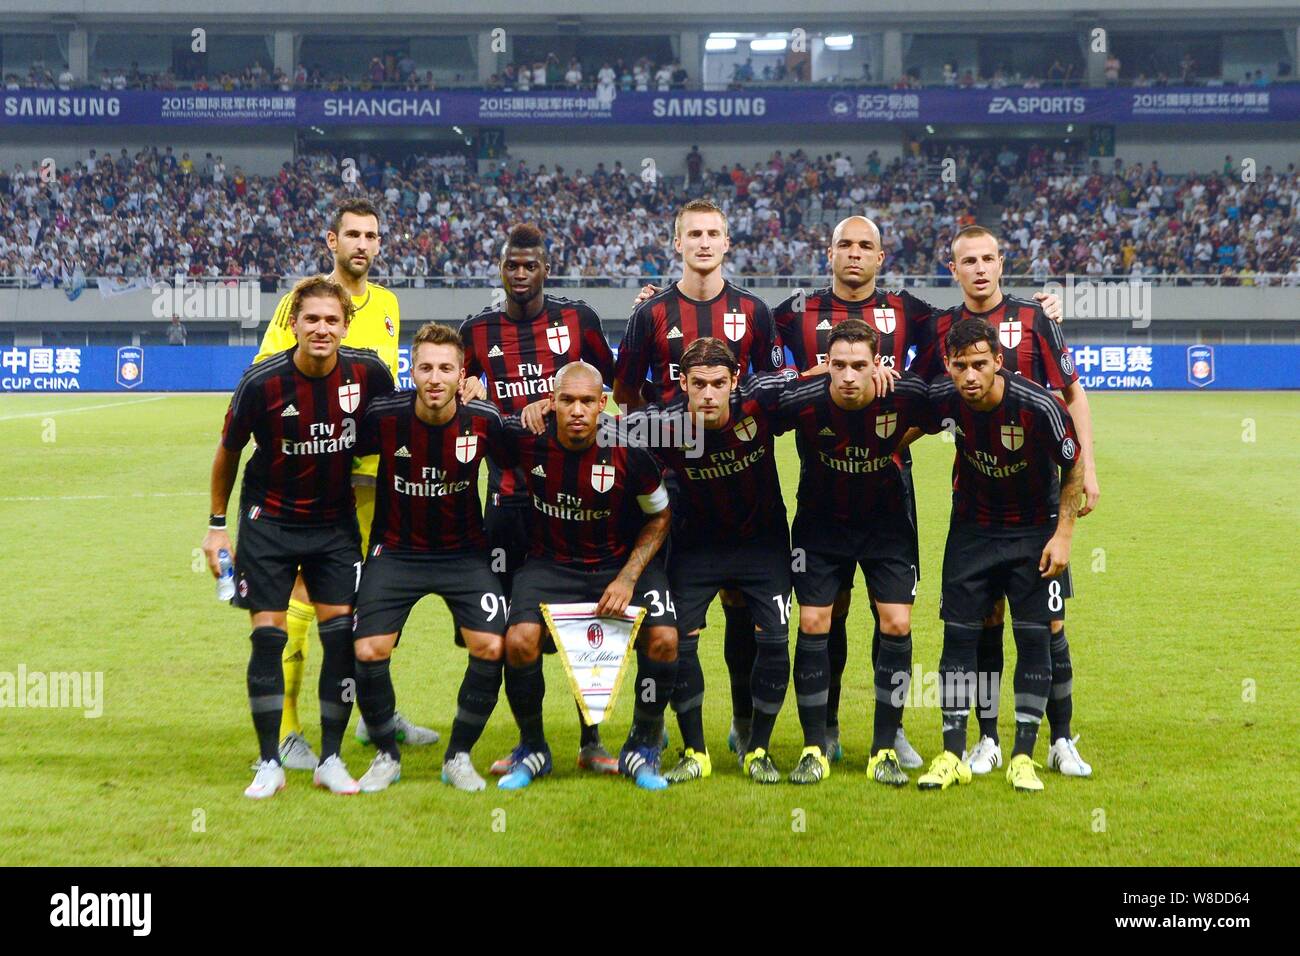 Players of the starting line-up of AC Milan pose for photos before the  Shanghai match of the International Champions Cup 2015 against Real Madrid  at t Stock Photo - Alamy